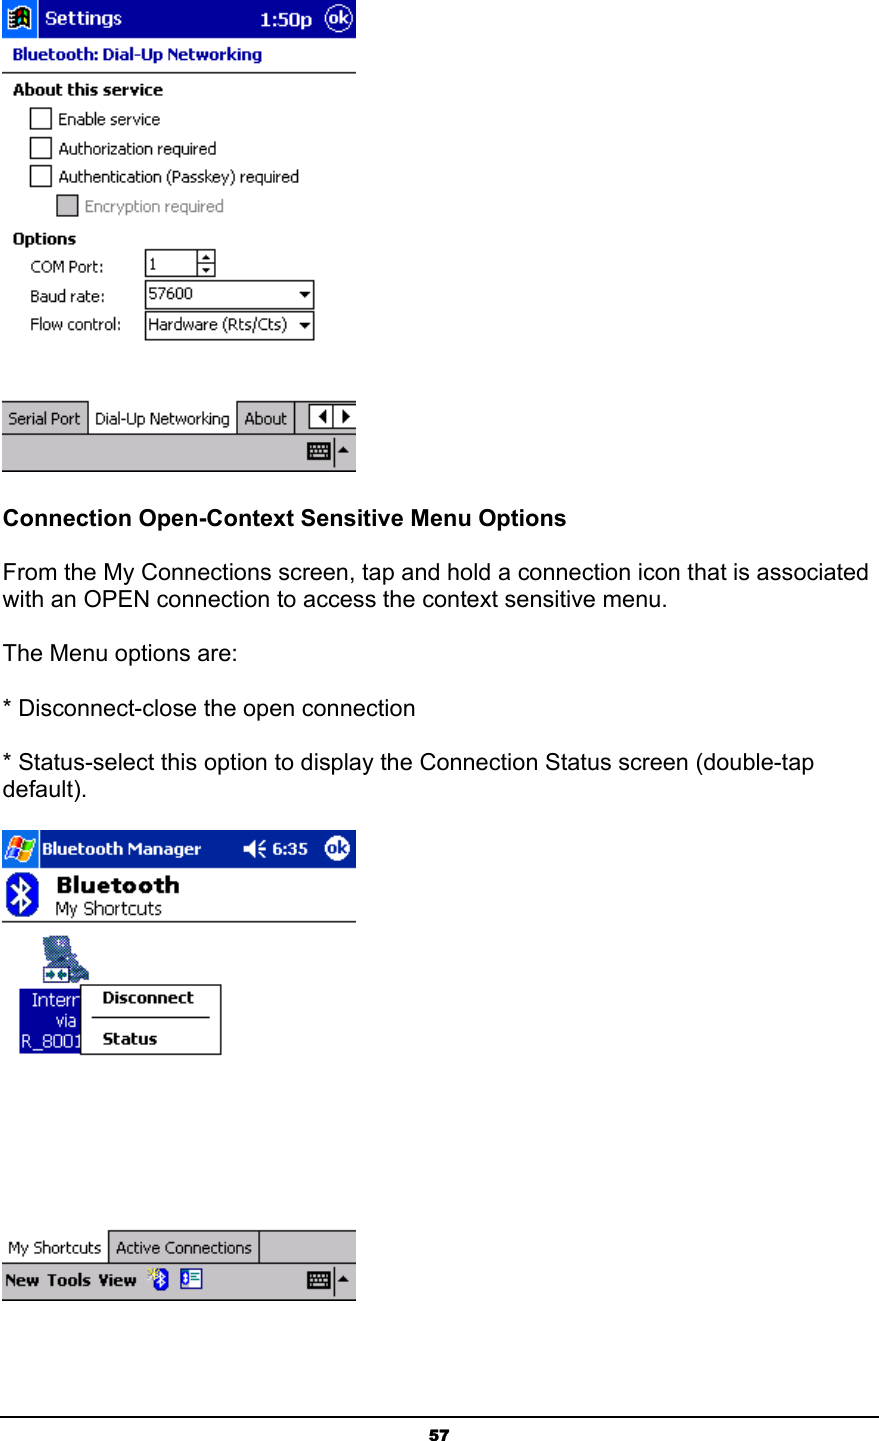   57     Connection Open-Context Sensitive Menu Options From the My Connections screen, tap and hold a connection icon that is associated with an OPEN connection to access the context sensitive menu. The Menu options are: * Disconnect-close the open connection * Status-select this option to display the Connection Status screen (double-tap default).   